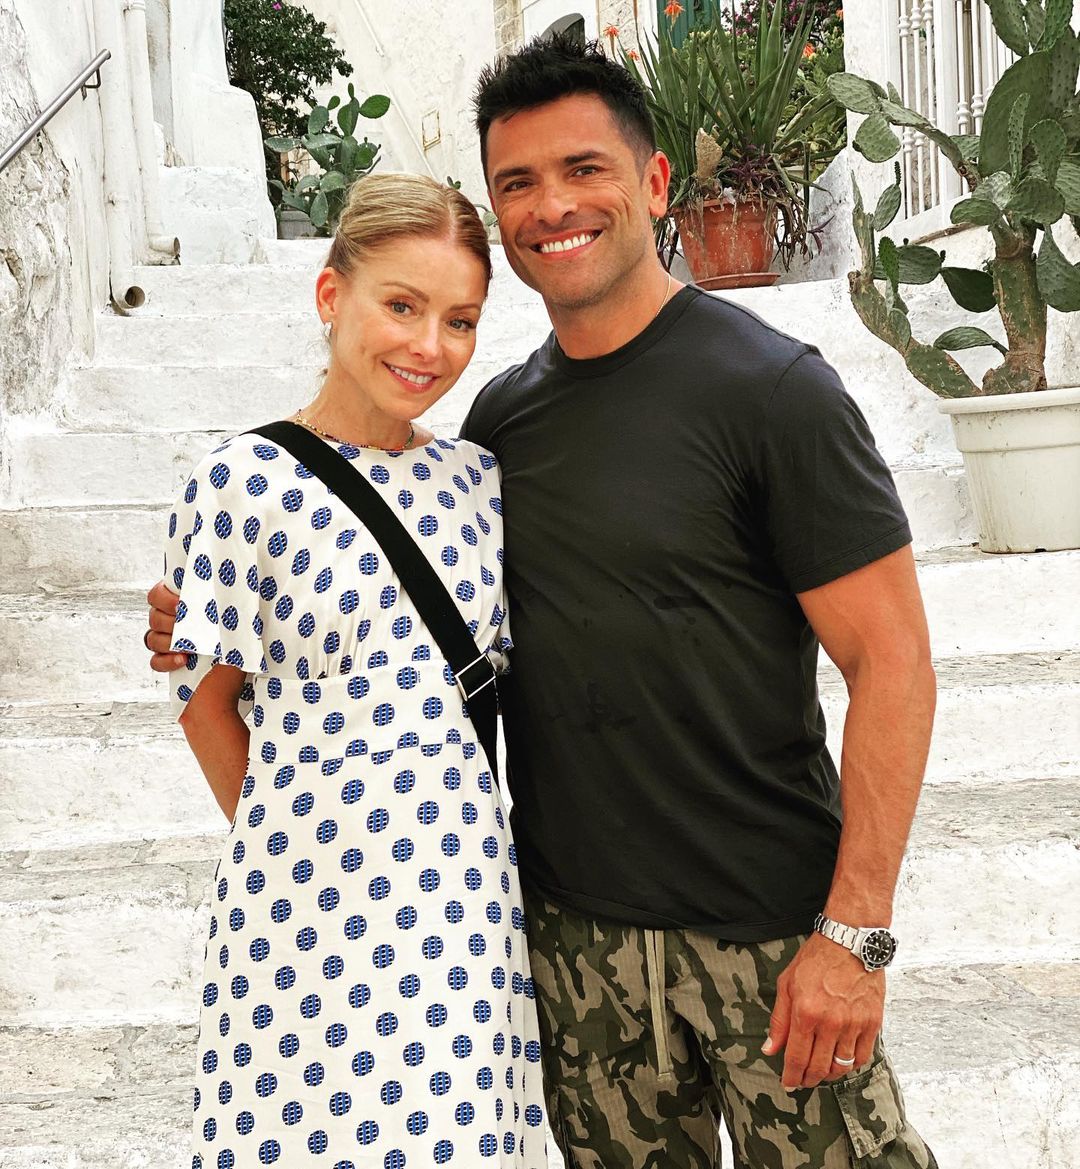 Kelly Ripa and Mark Consuelos posing close together at the bottom of a white painted stone staircase